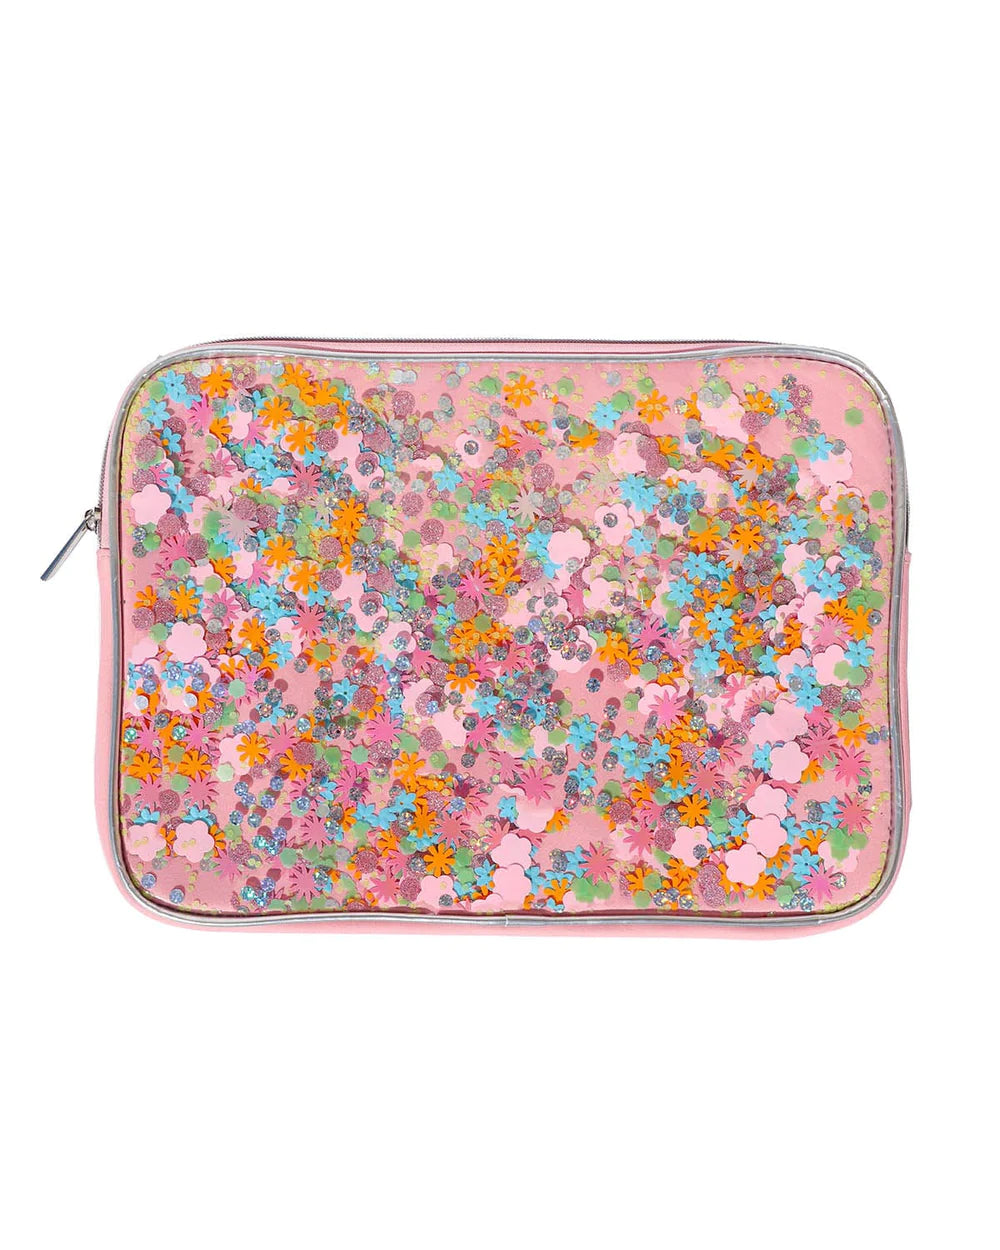 Flower shop confetti sleeve and carry case-Little Fish Co.